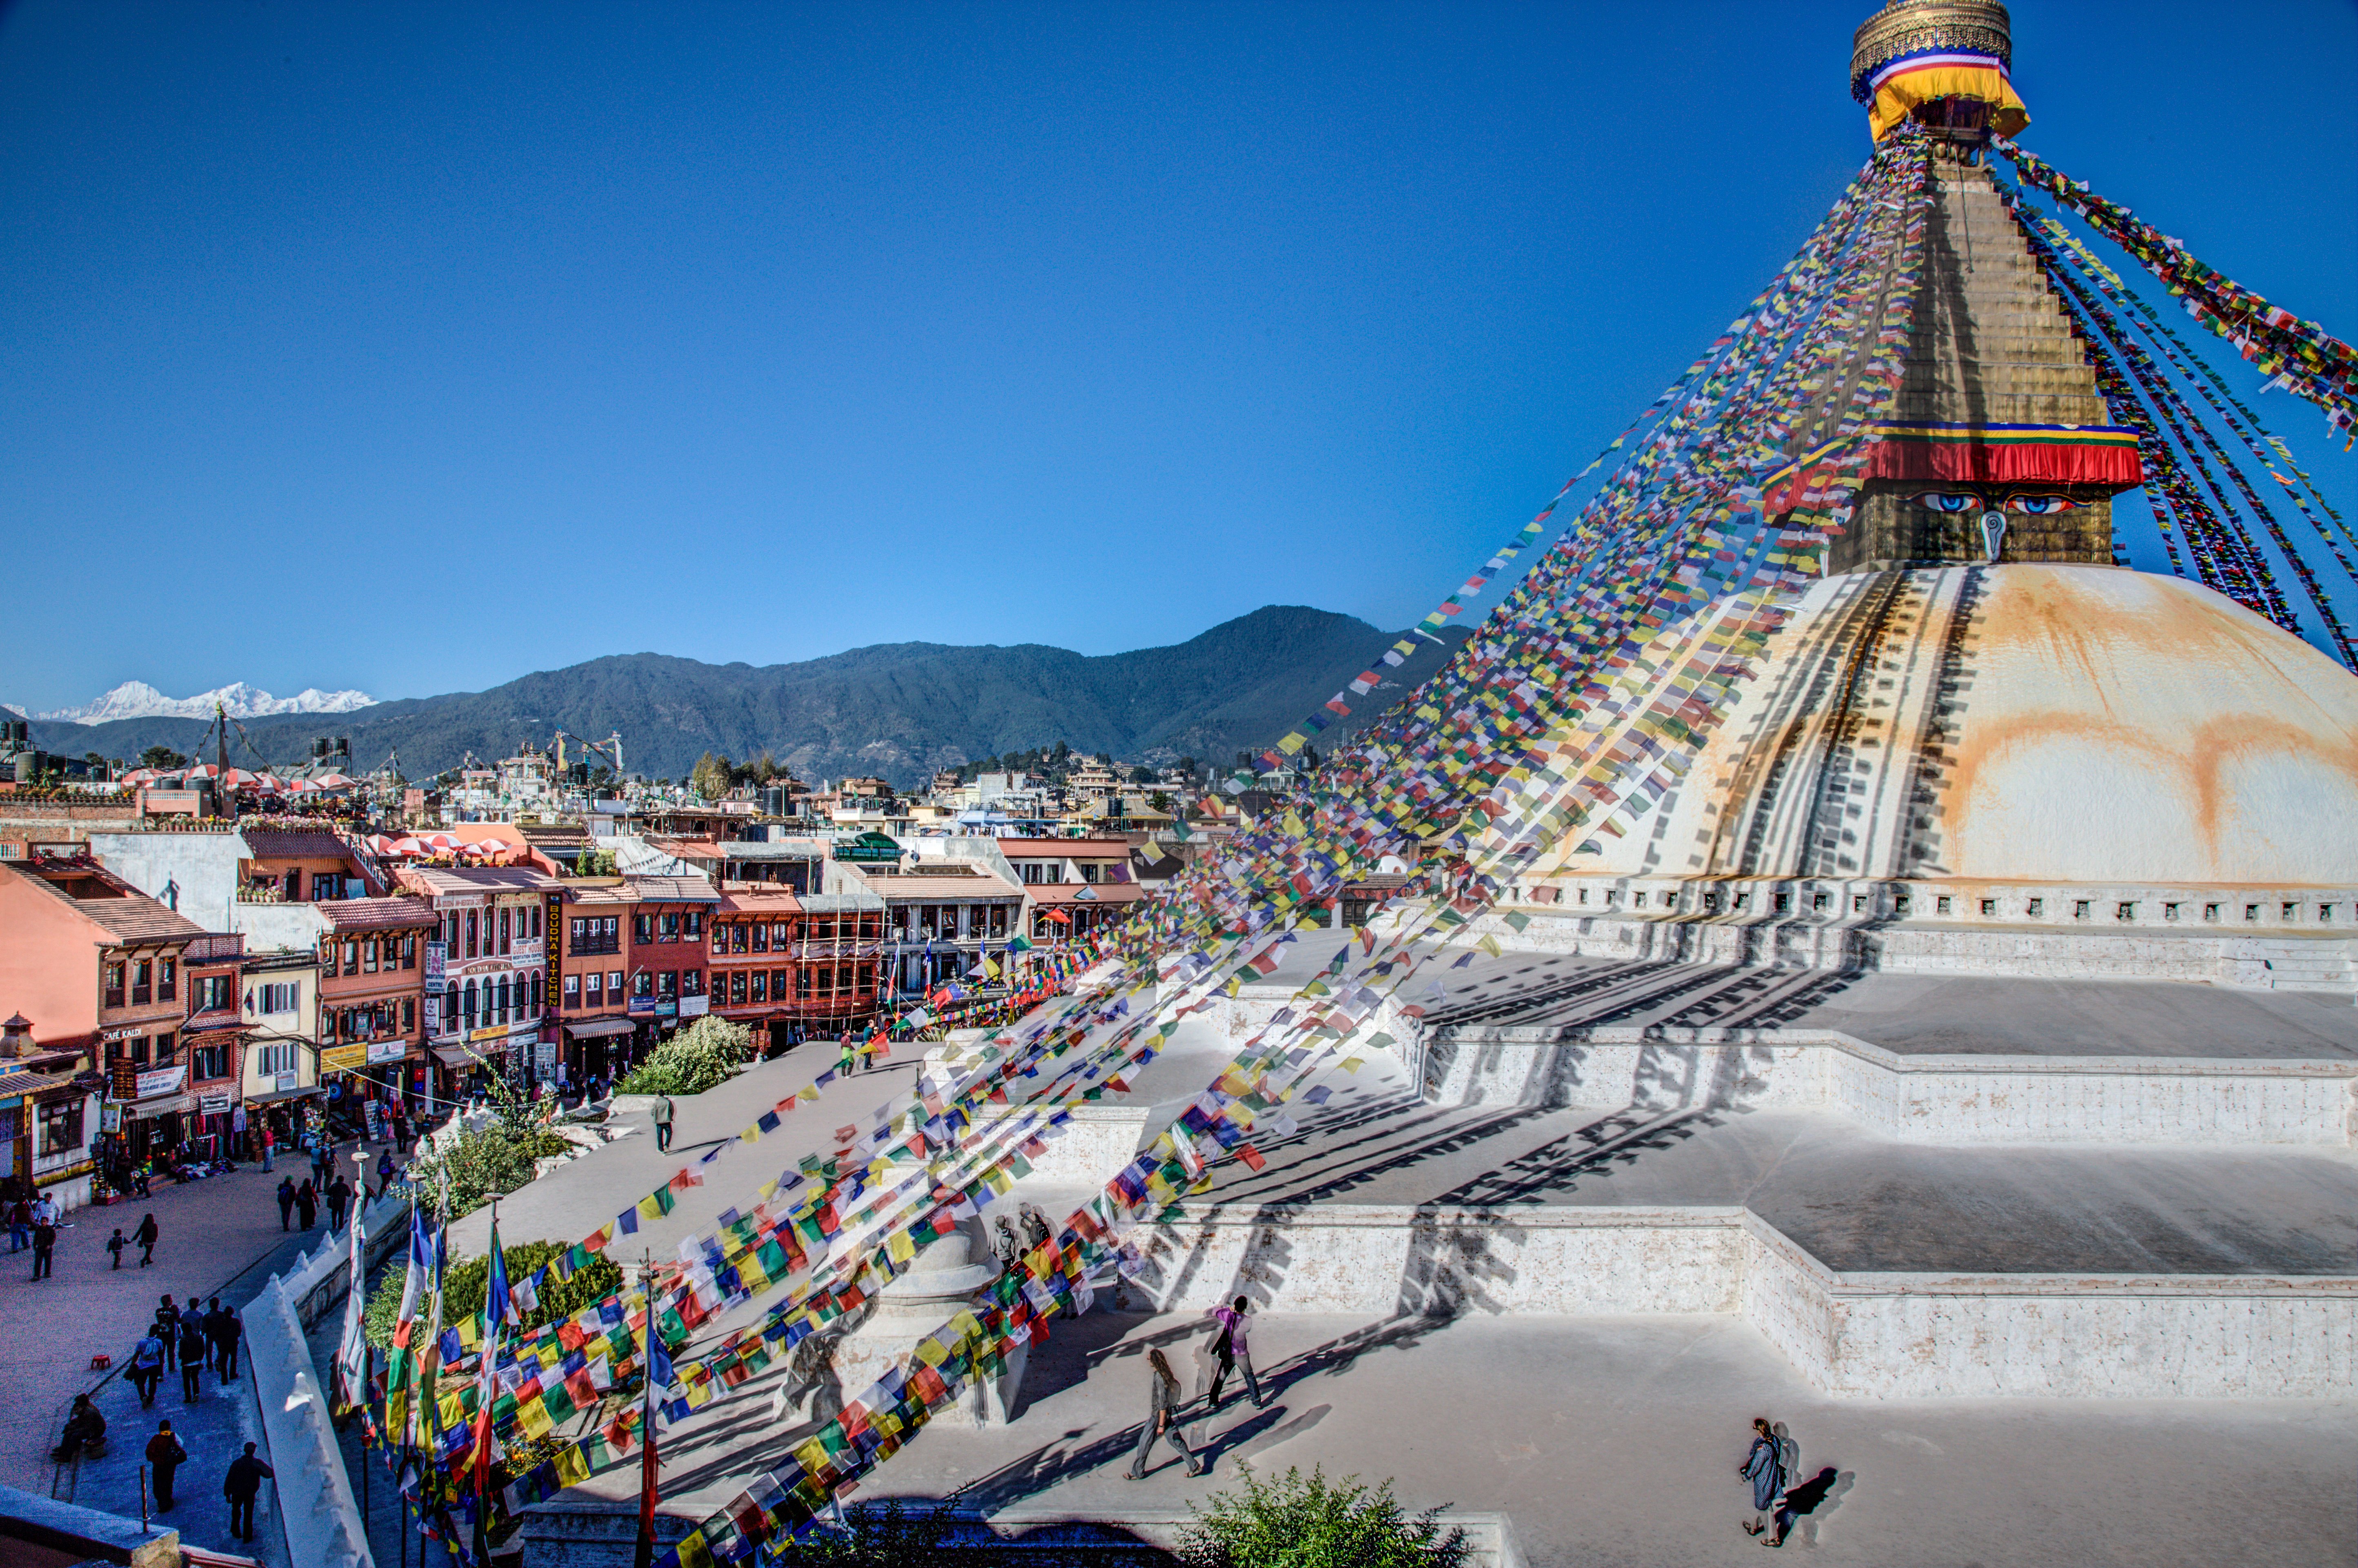  The Boudhanath stupa, a large white dome-shaped structure with a golden spire on top. The stupa is surrounded by colorful prayer flags fluttering in the wind, with traditional Nepalese buildings in the background, painted in bright colours..